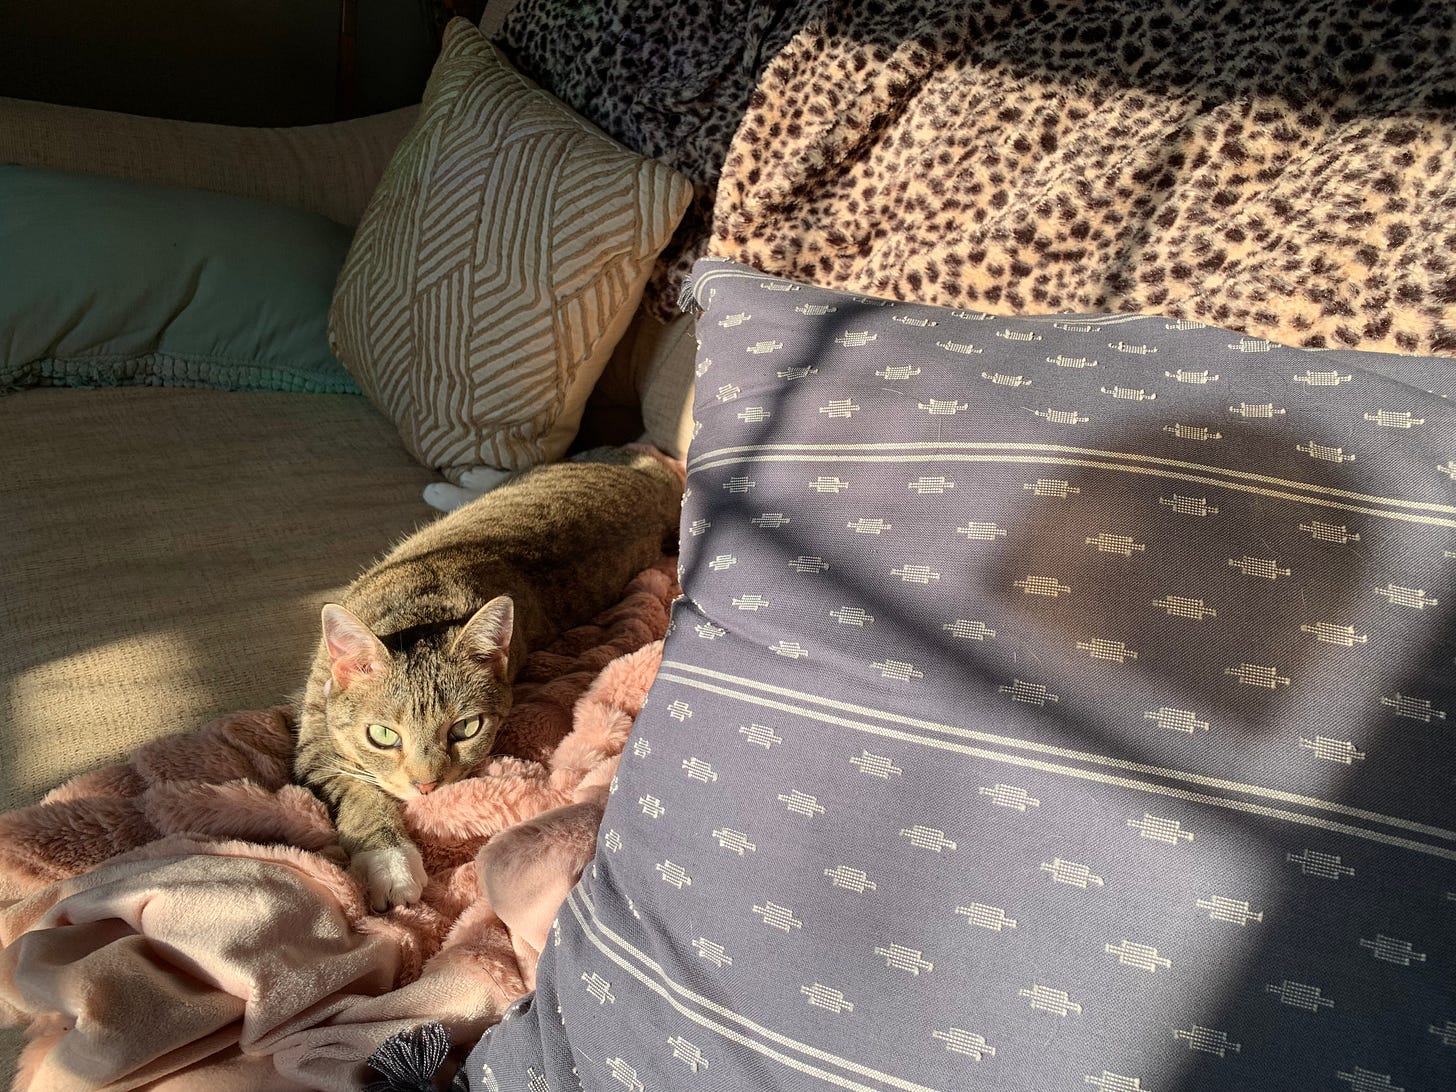 A tabby cat lying on a couch covered in pillows and blankets looks up at the viewer, bathed in sunlight